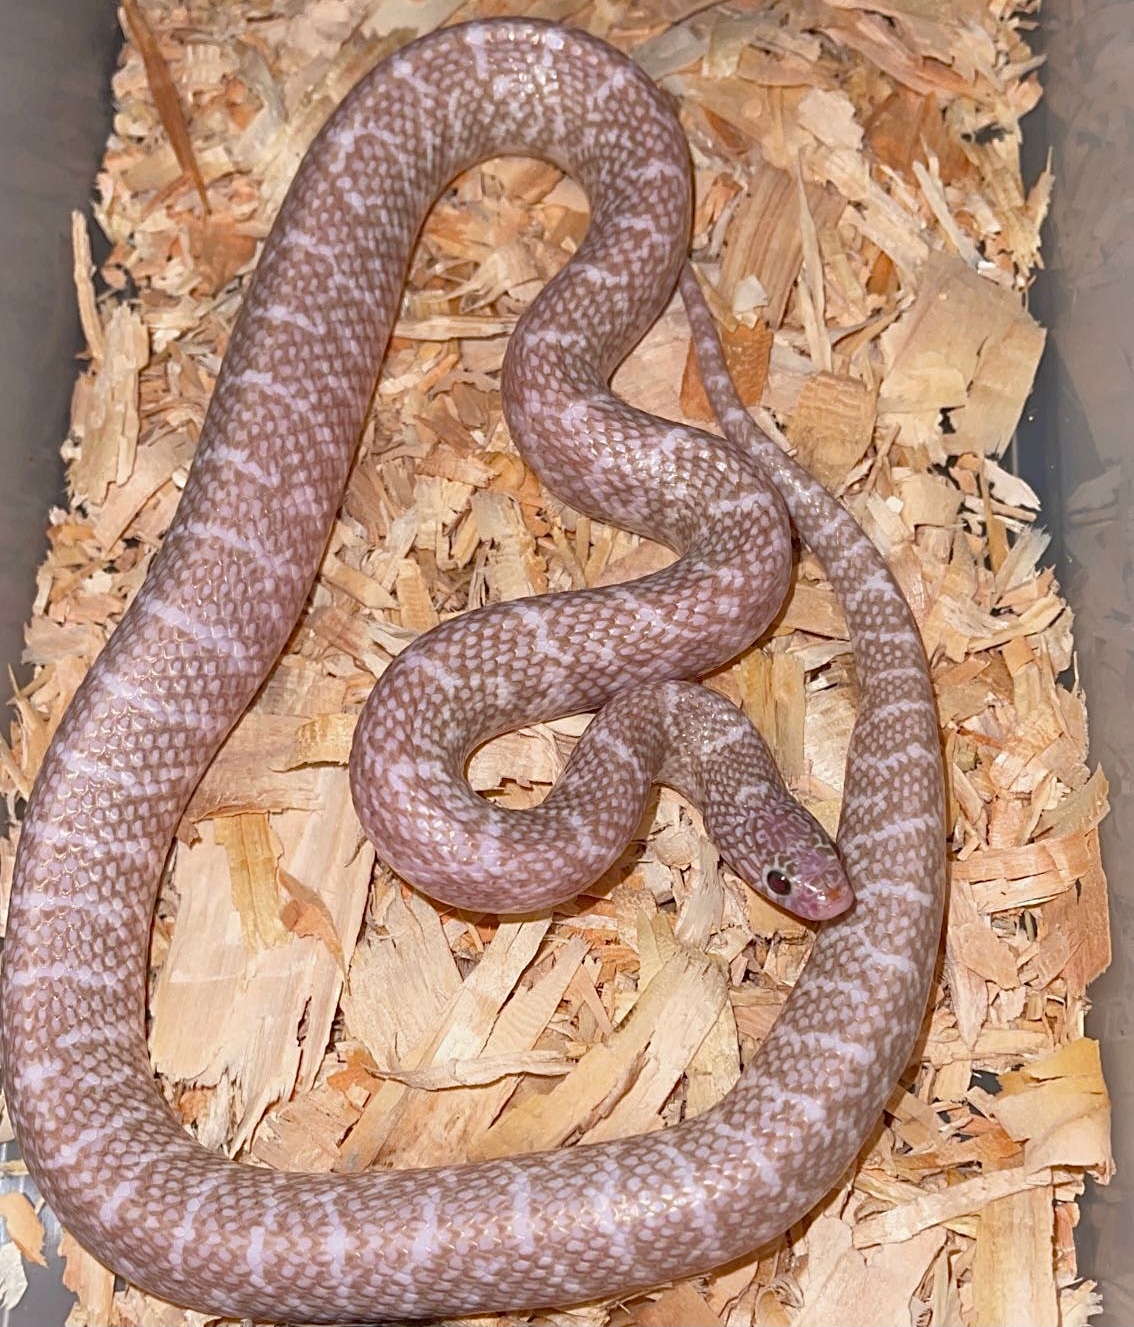 T- Peanut Butter Axanthic Hypo Florida Kingsnake by RB